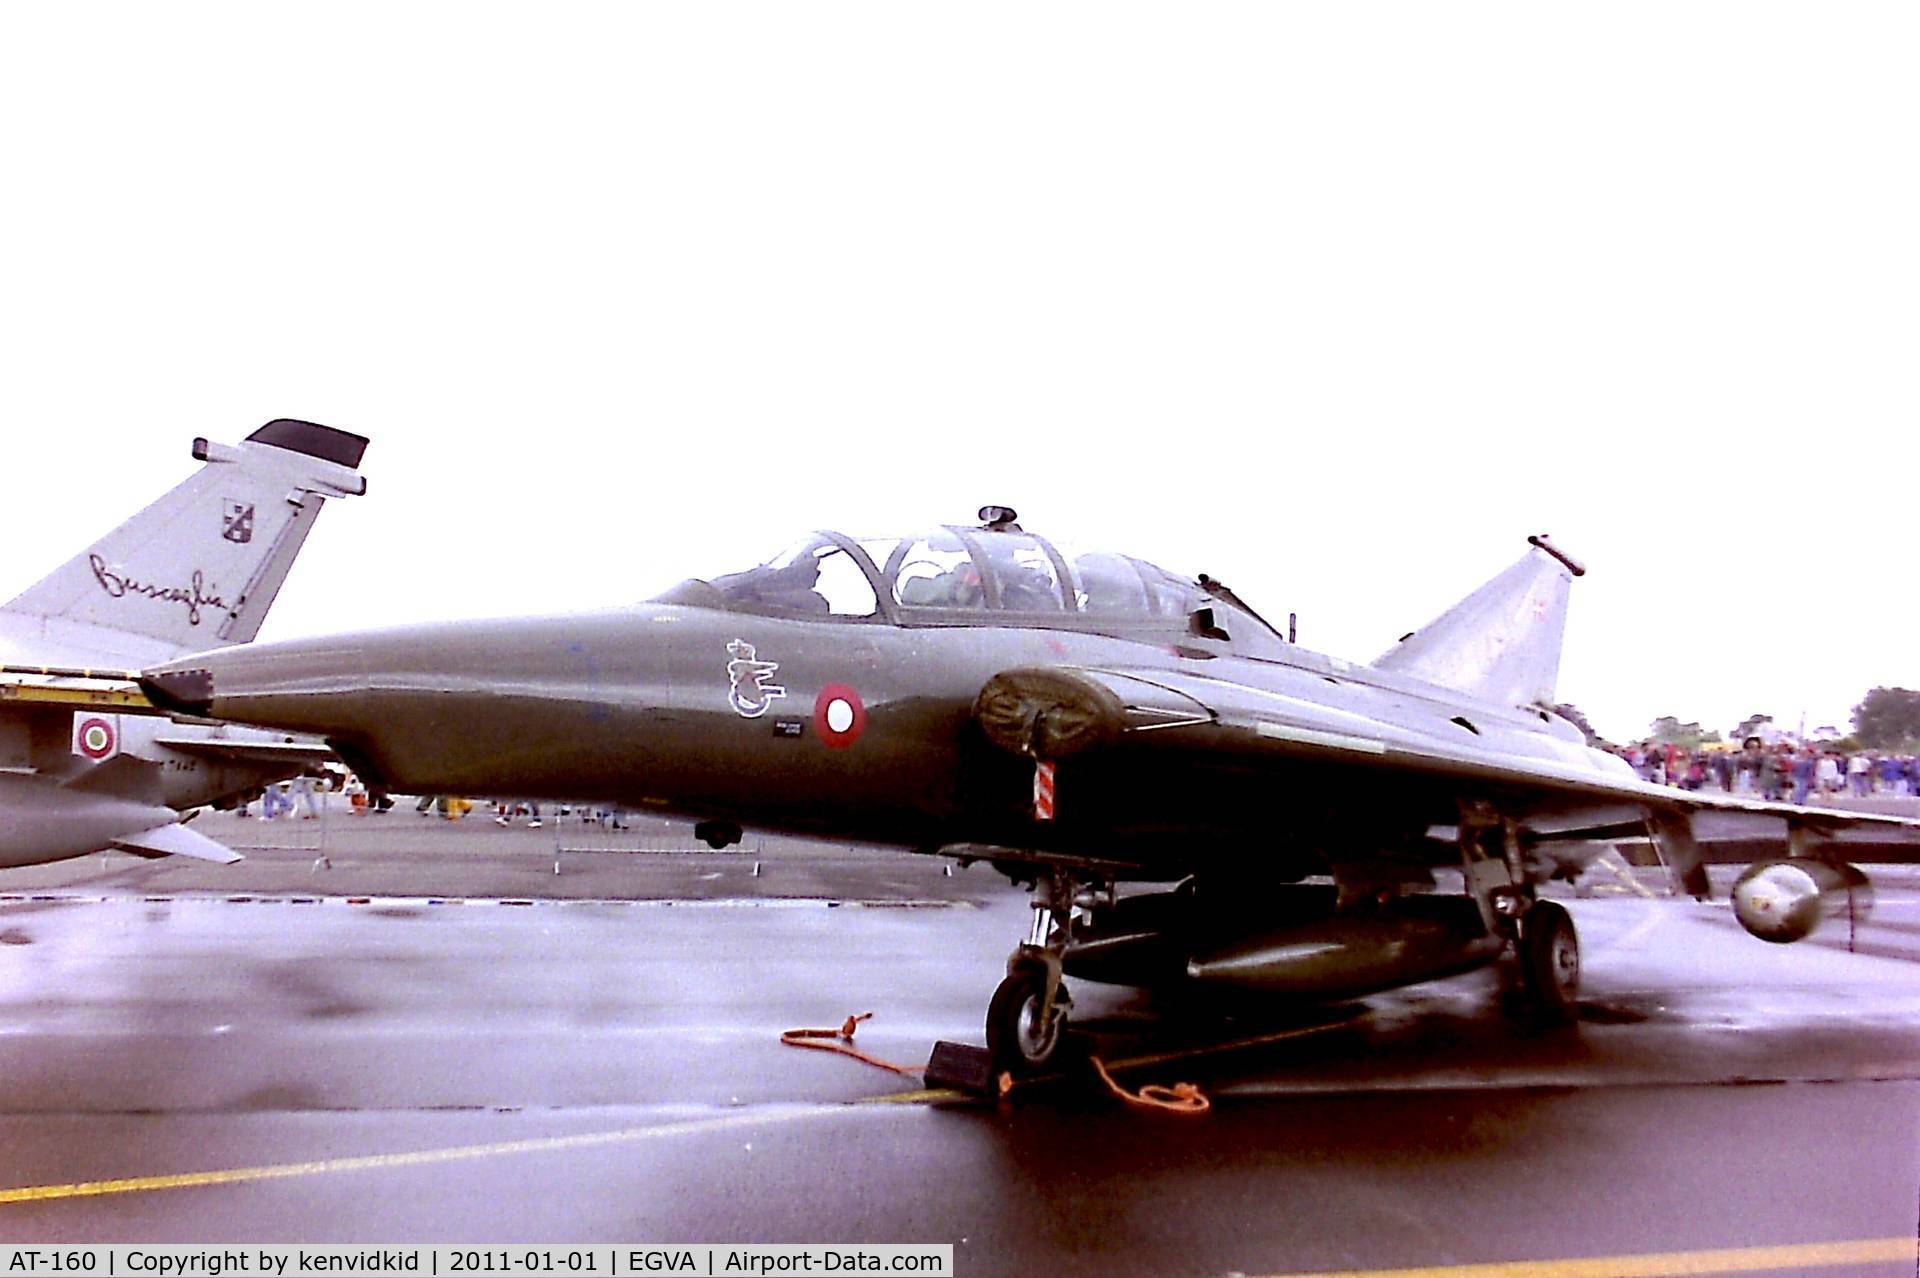 AT-160, 1977 Saab TF-35 Draken C/N 35-1160, At RIAT 1993, scanned from negative.